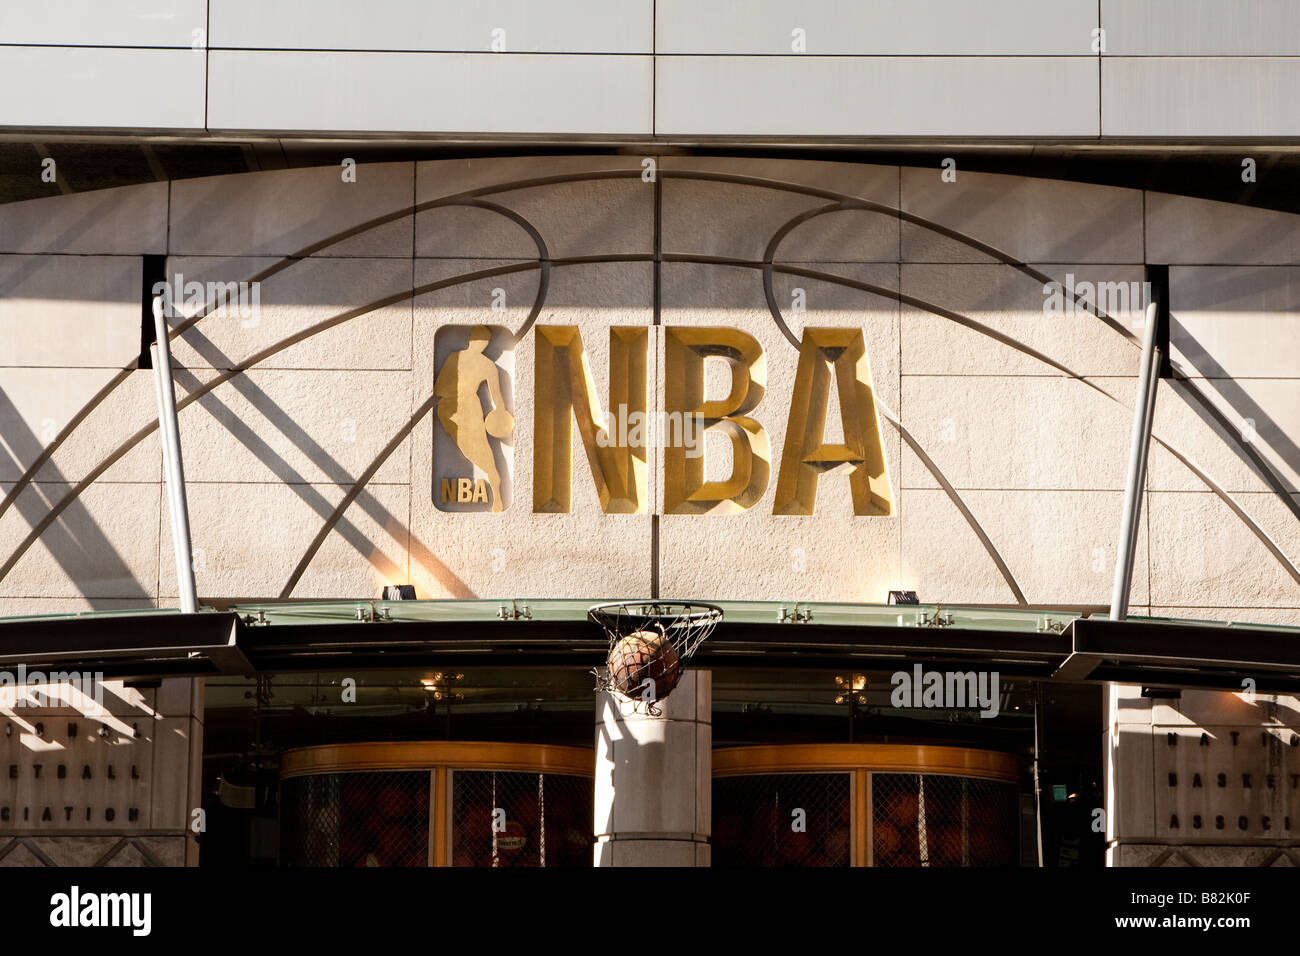 Nba store hi-res stock photography and images - Page 3 - Alamy